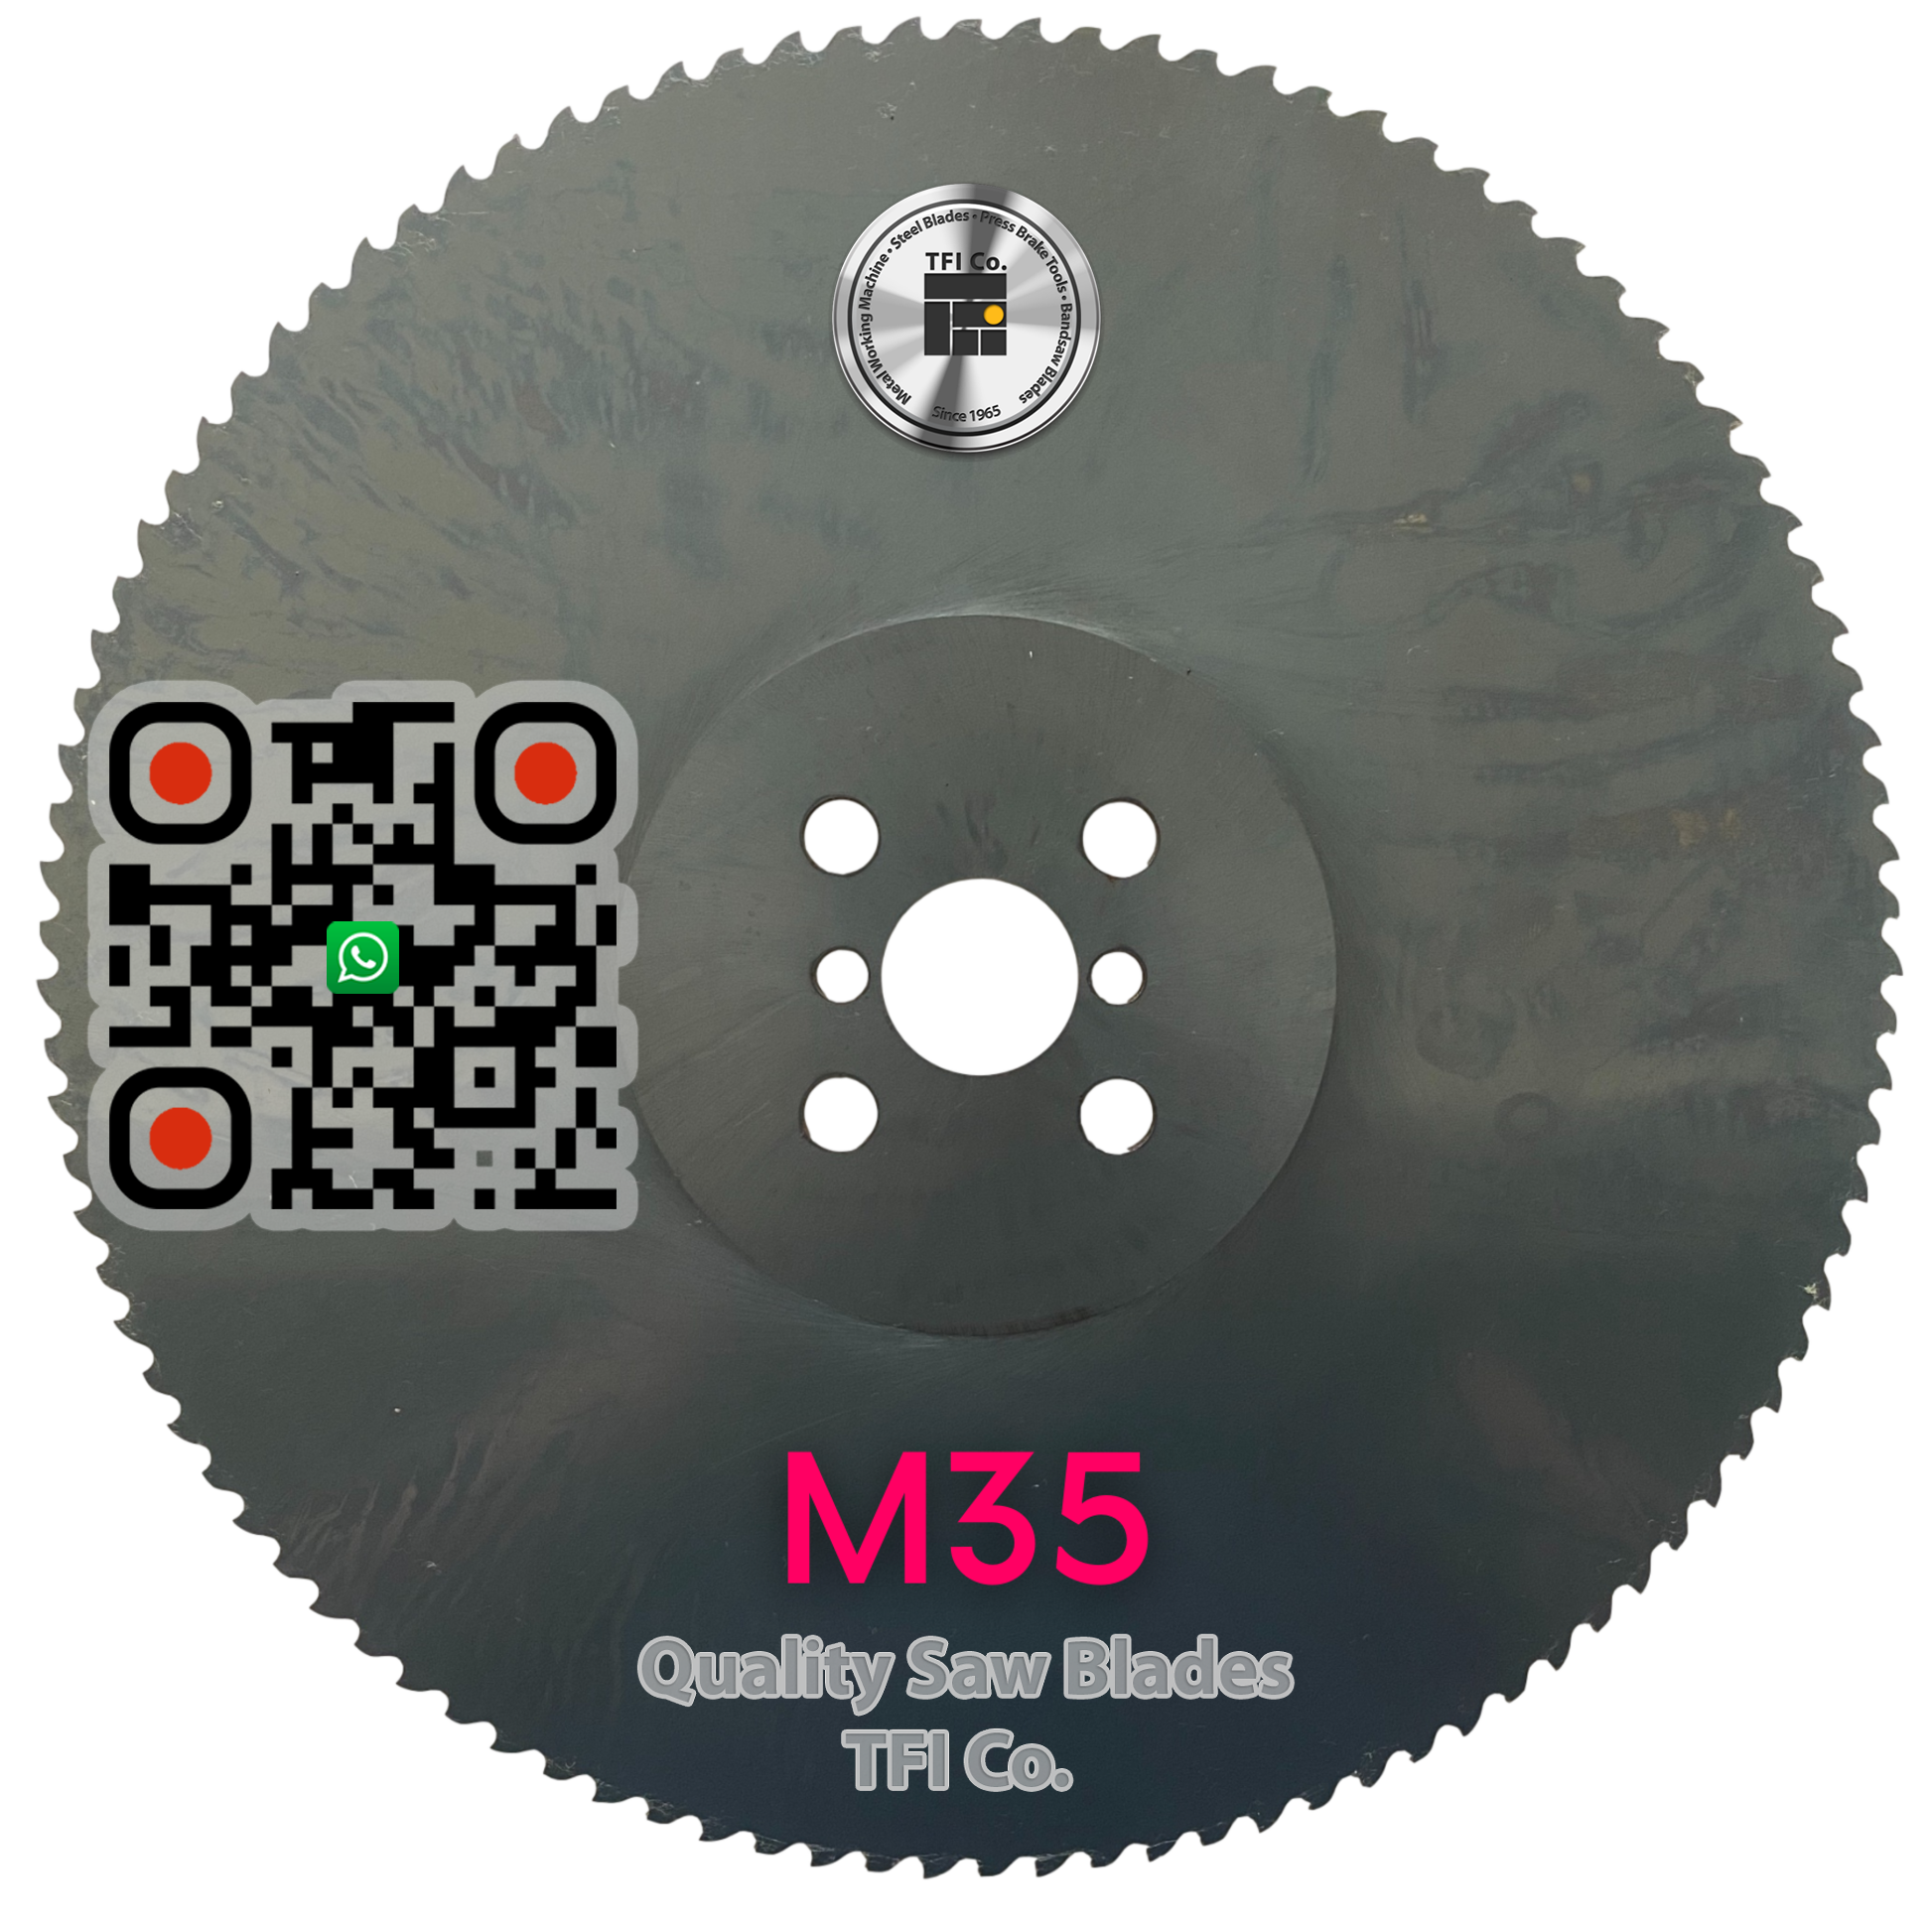 GCC, Middle East, TFI Co., English, 350, 2.5, 32, HSS, M35, Co5, Cold Saw Blade